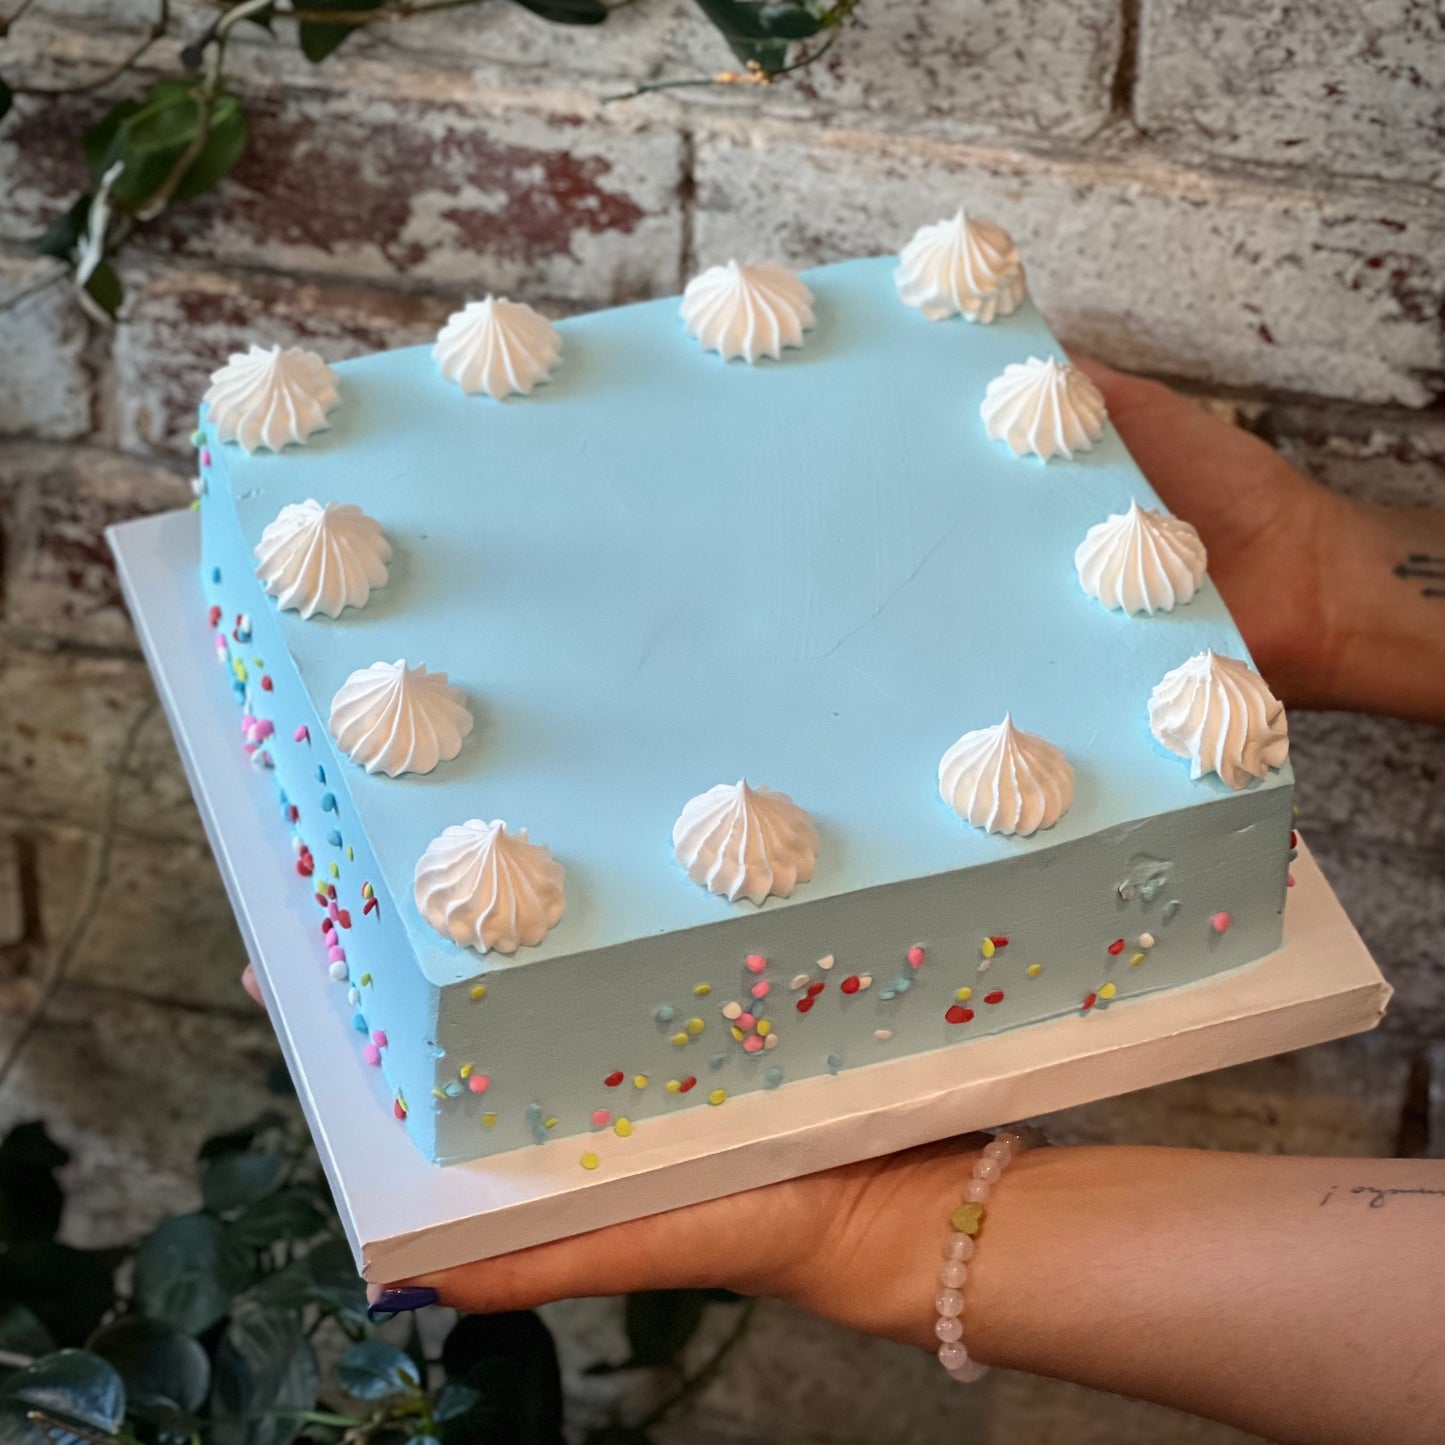 Square pastel blue cake with white dollops